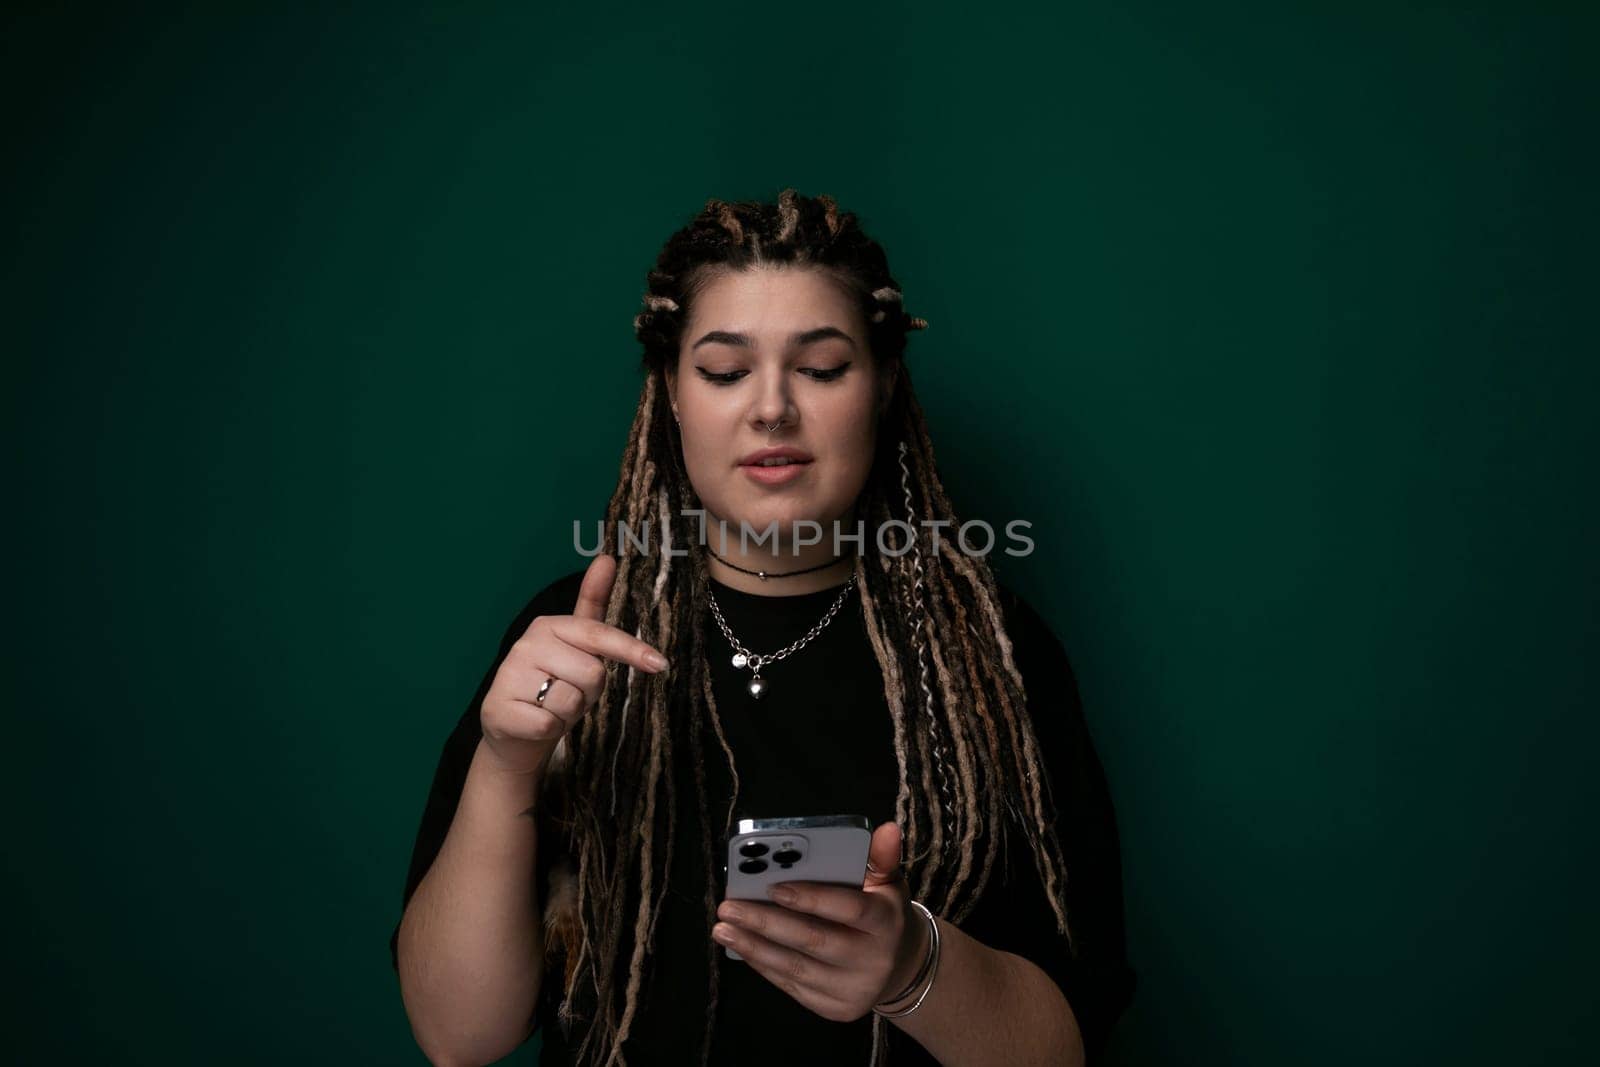 Woman With Dreadlocks Looking at Cell Phone by TRMK